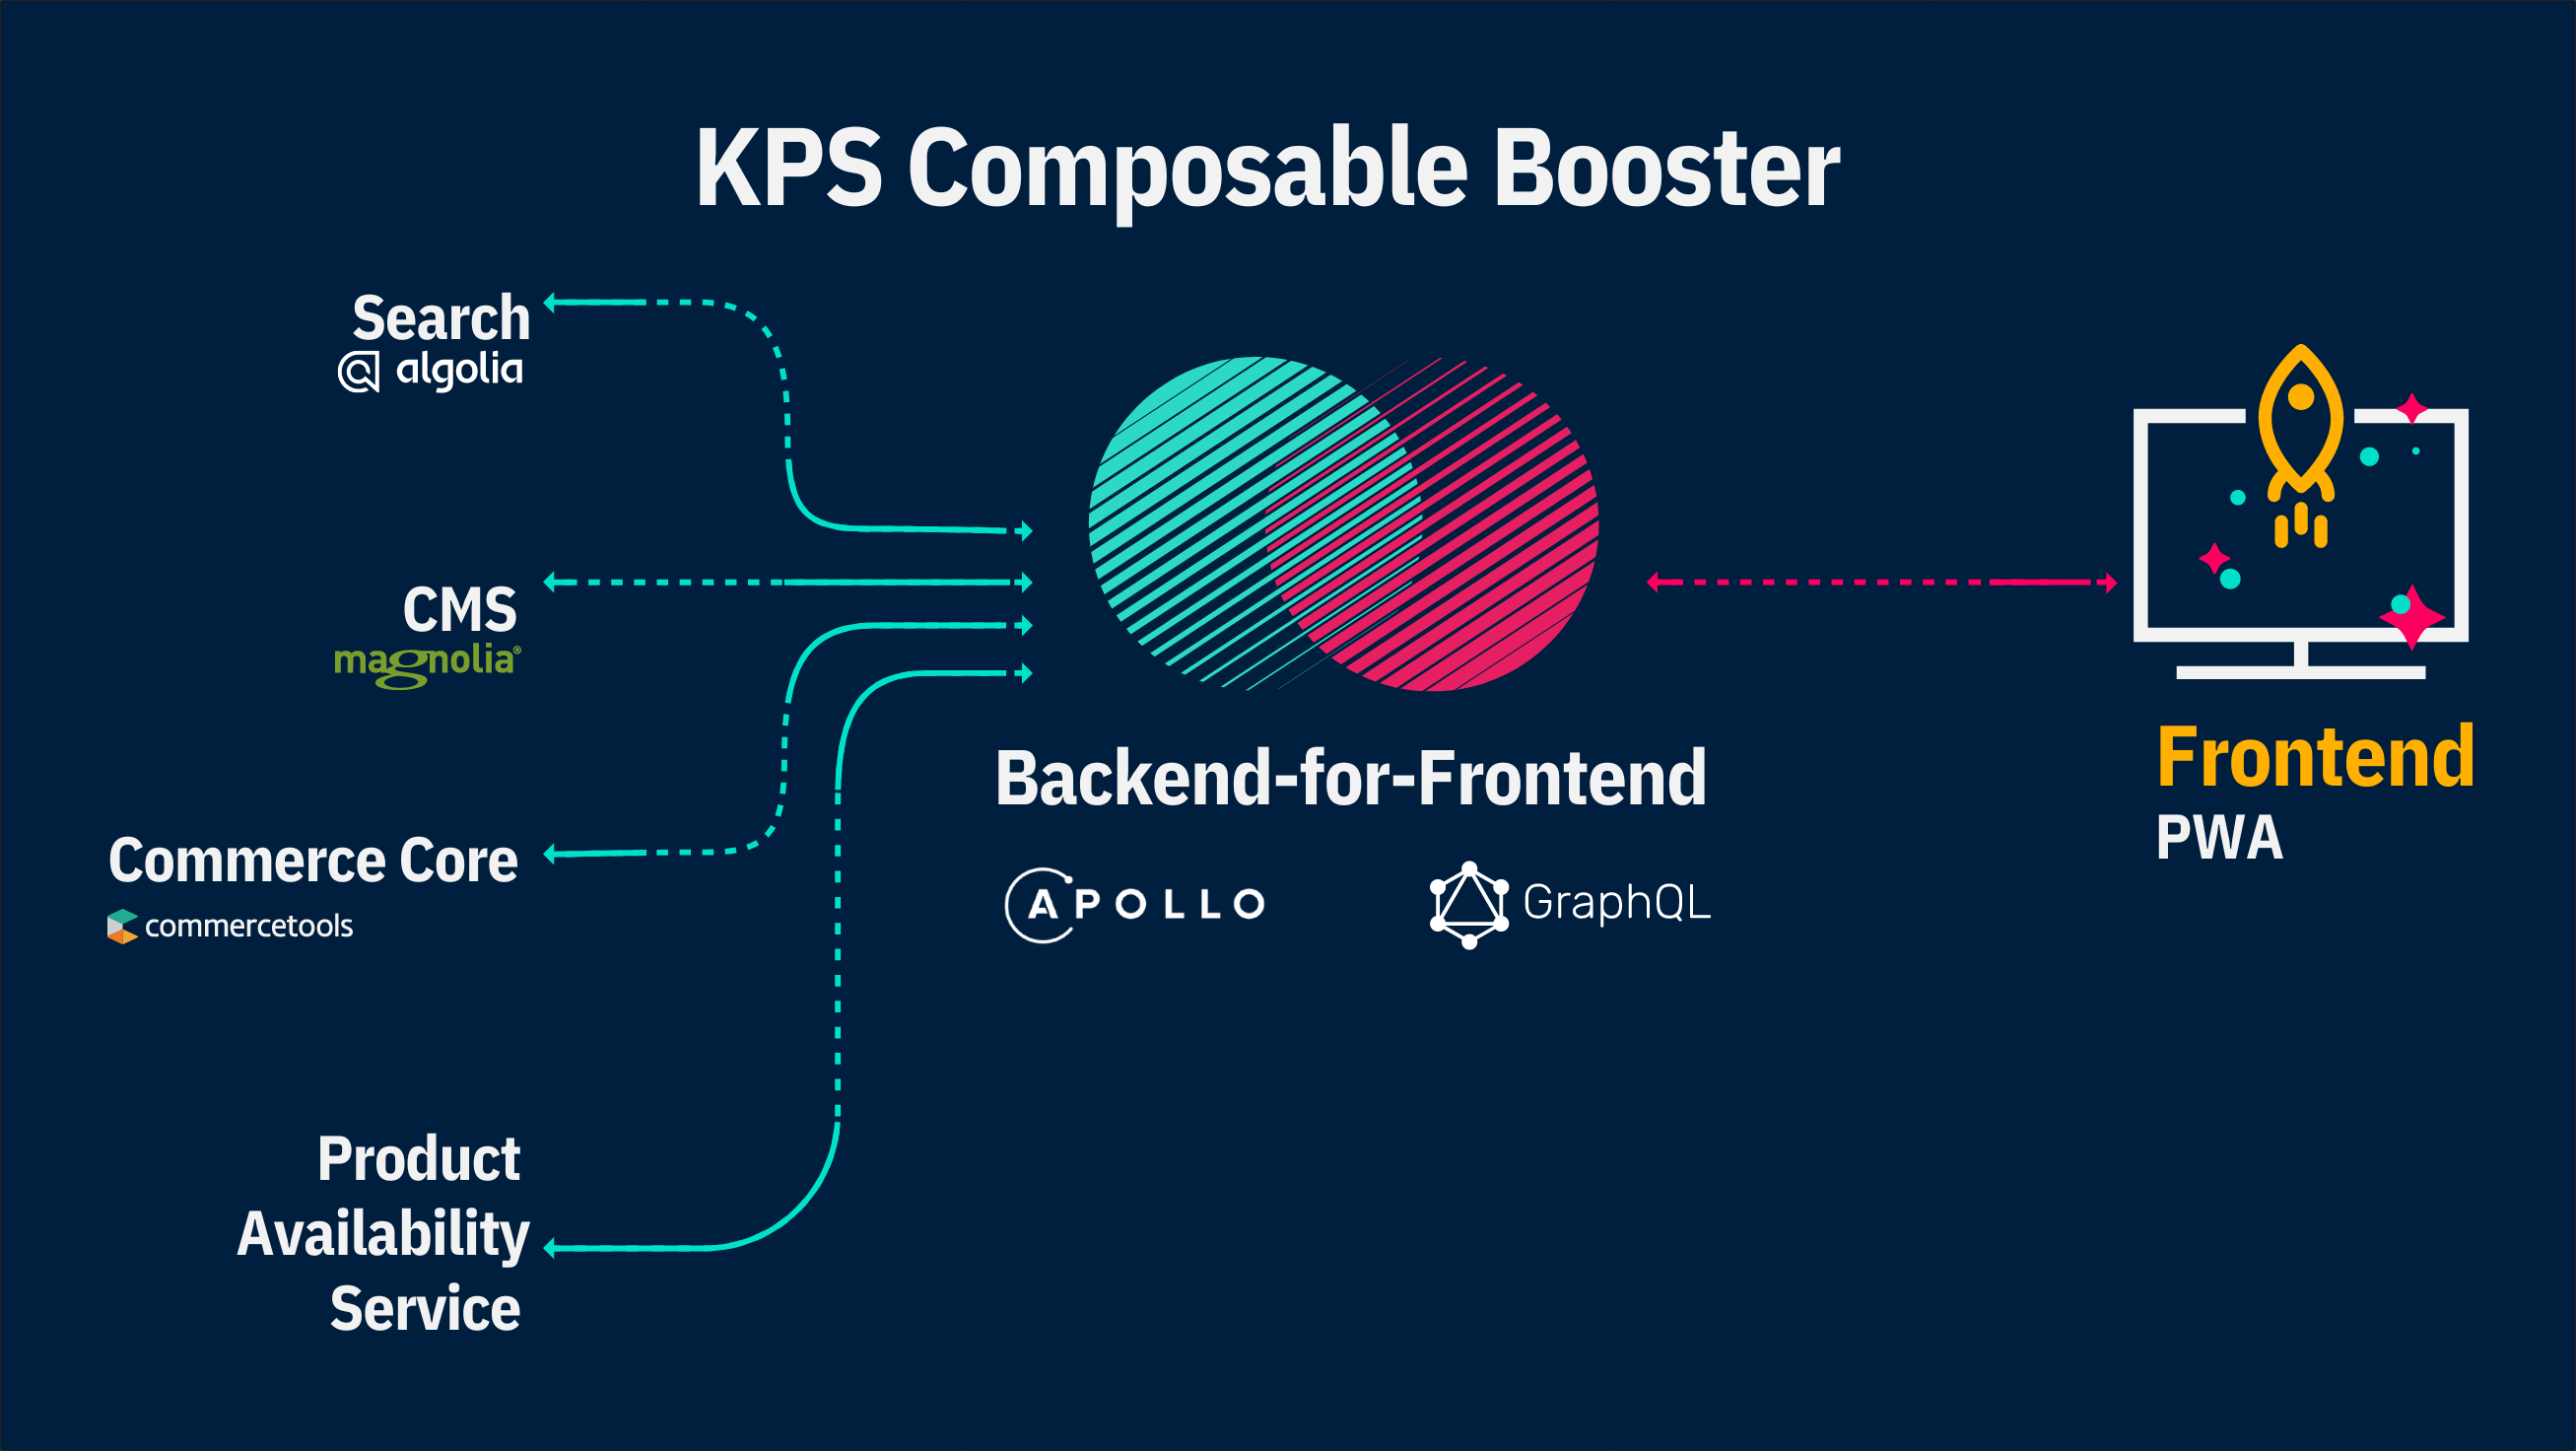 kps-composable-booster-darstellung.pdf.png